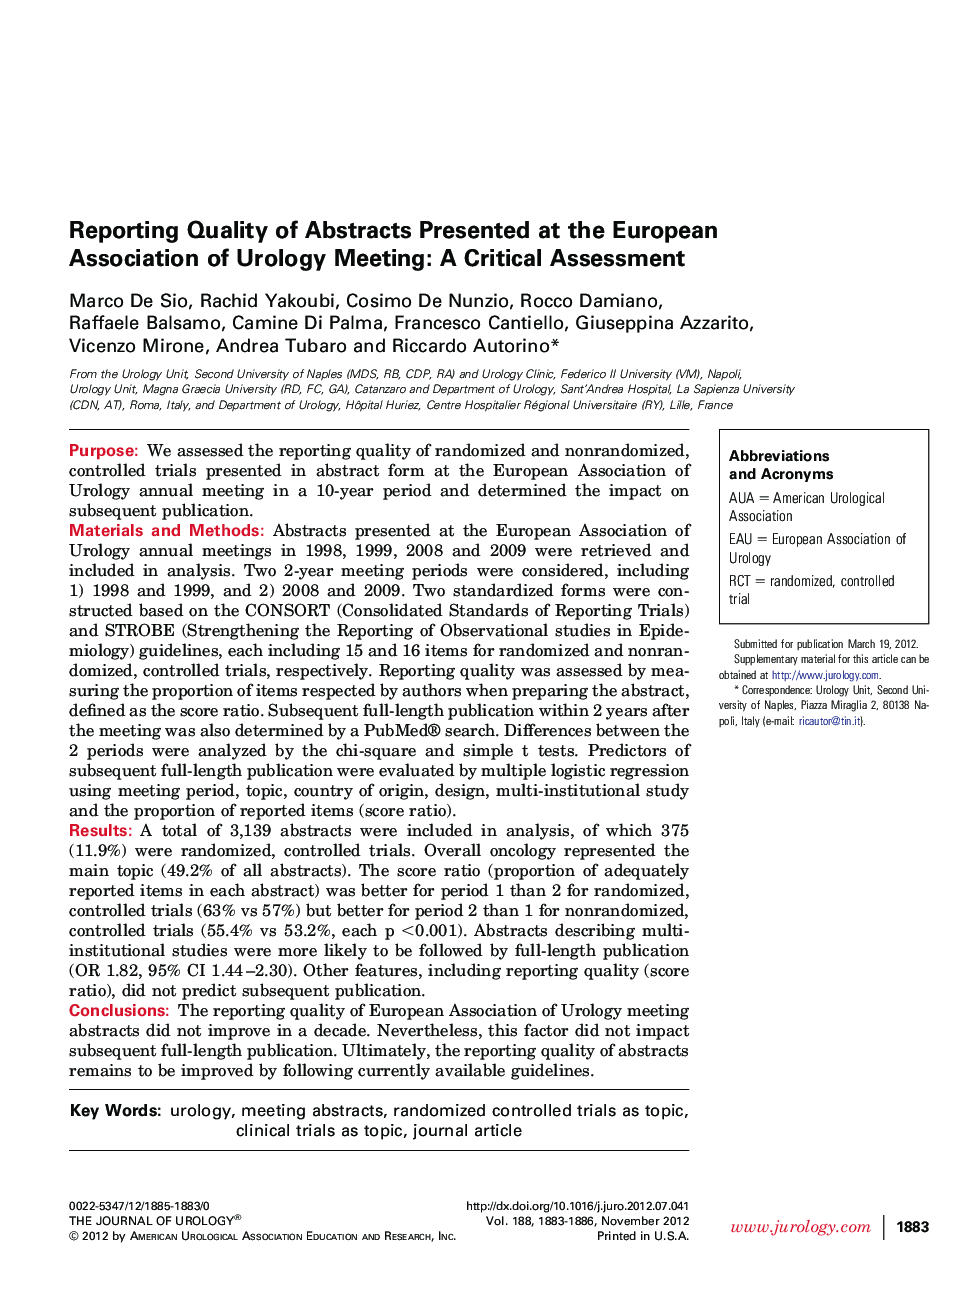 Reporting Quality of Abstracts Presented at the European Association of Urology Meeting: A Critical Assessment 